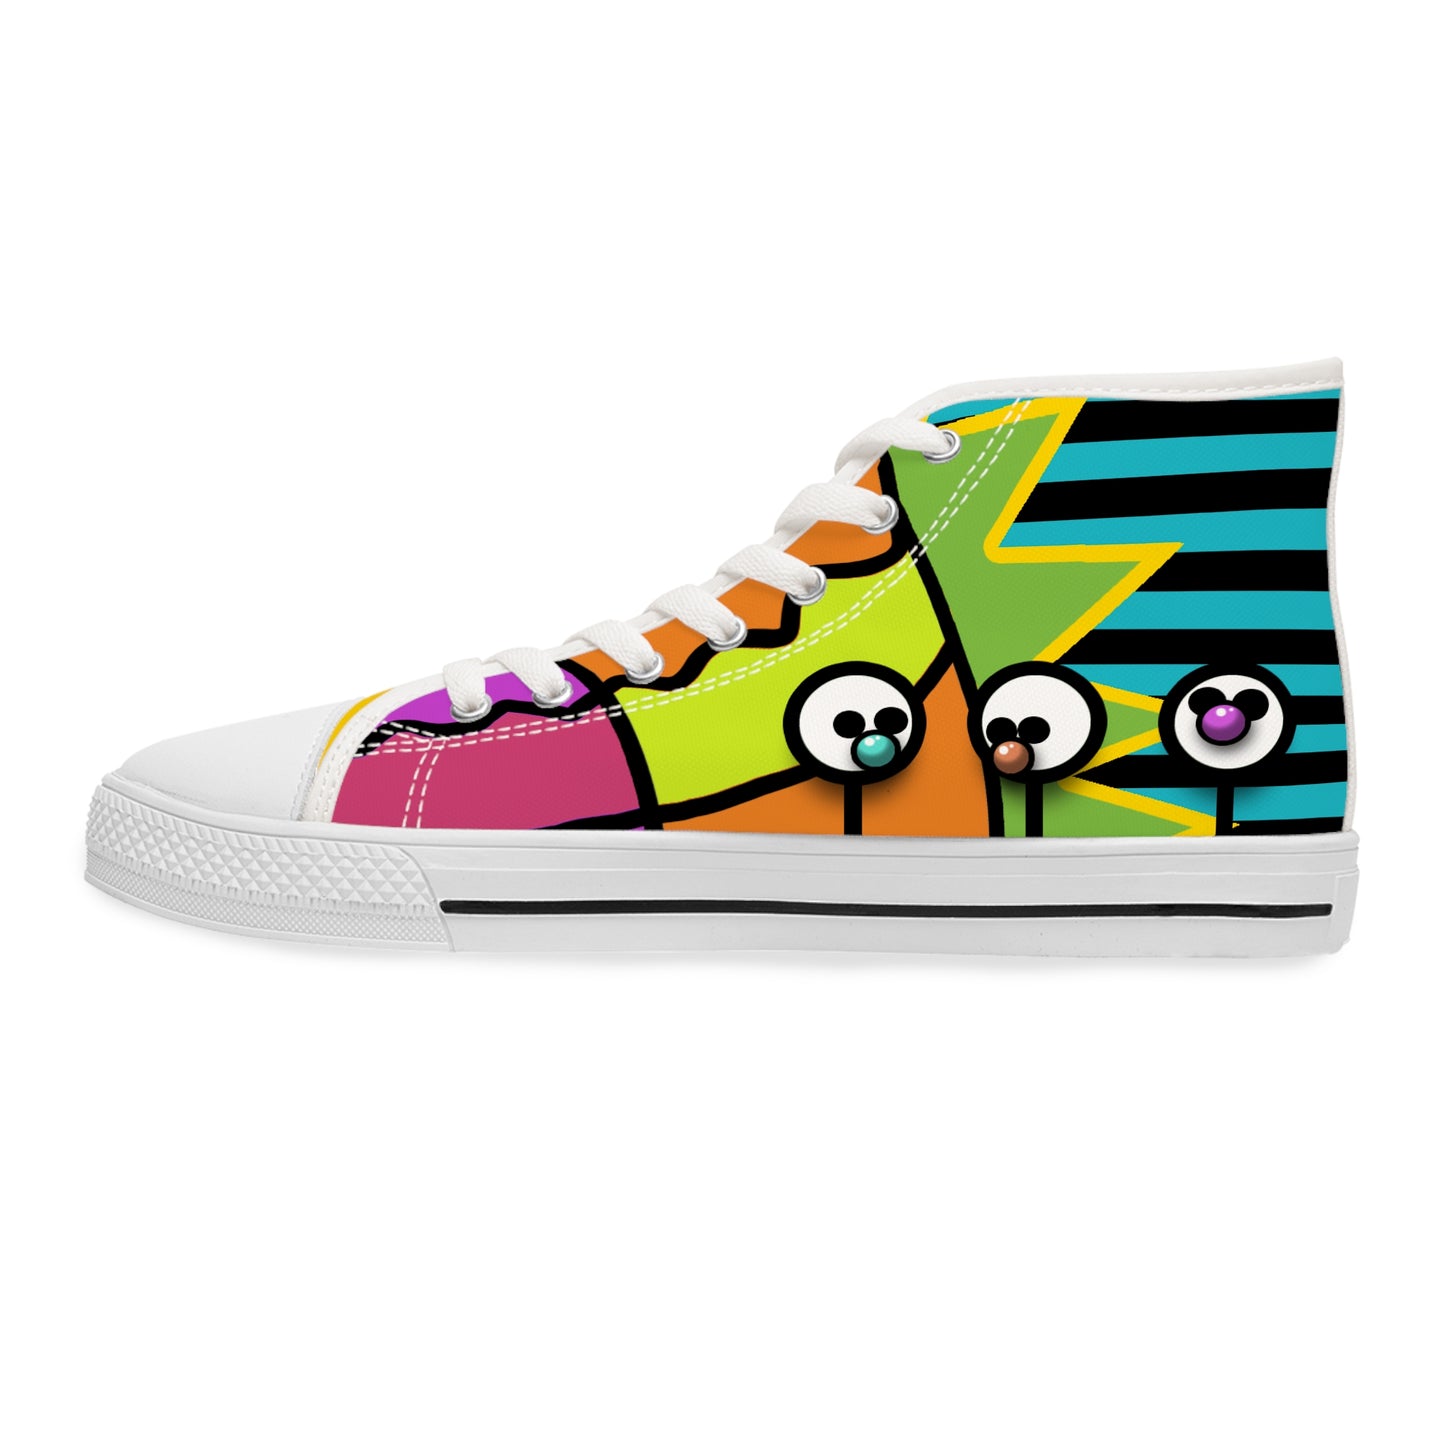 Women's High Top Graphics Sneakers - 10003 US 12 White sole